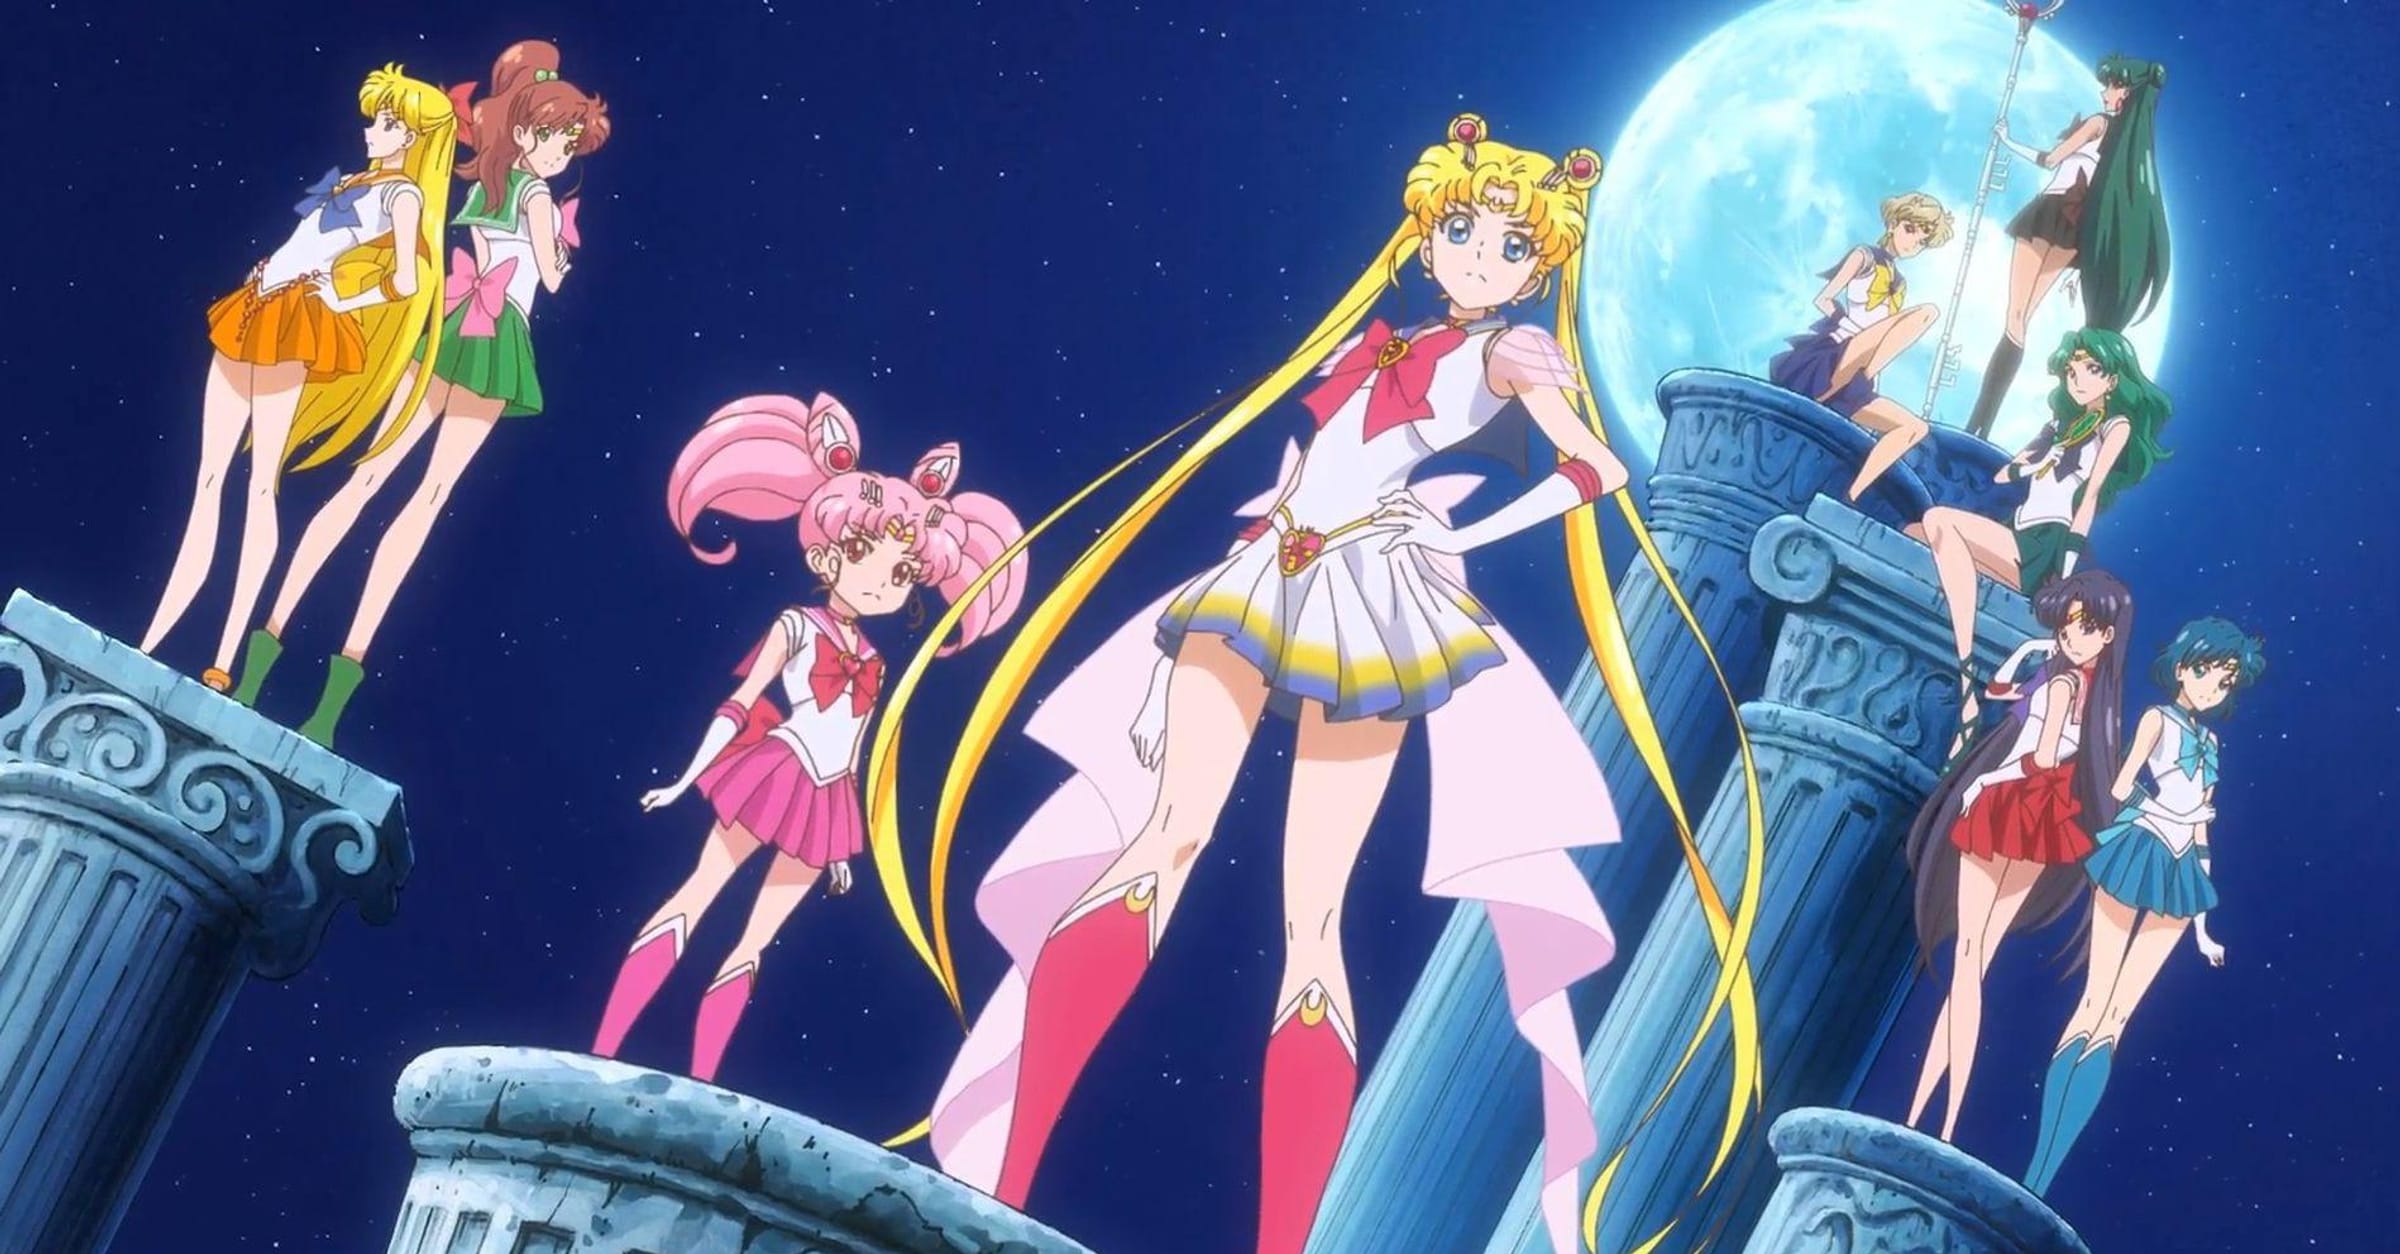 New character designs revealed for Sailor Moon Crystal, including